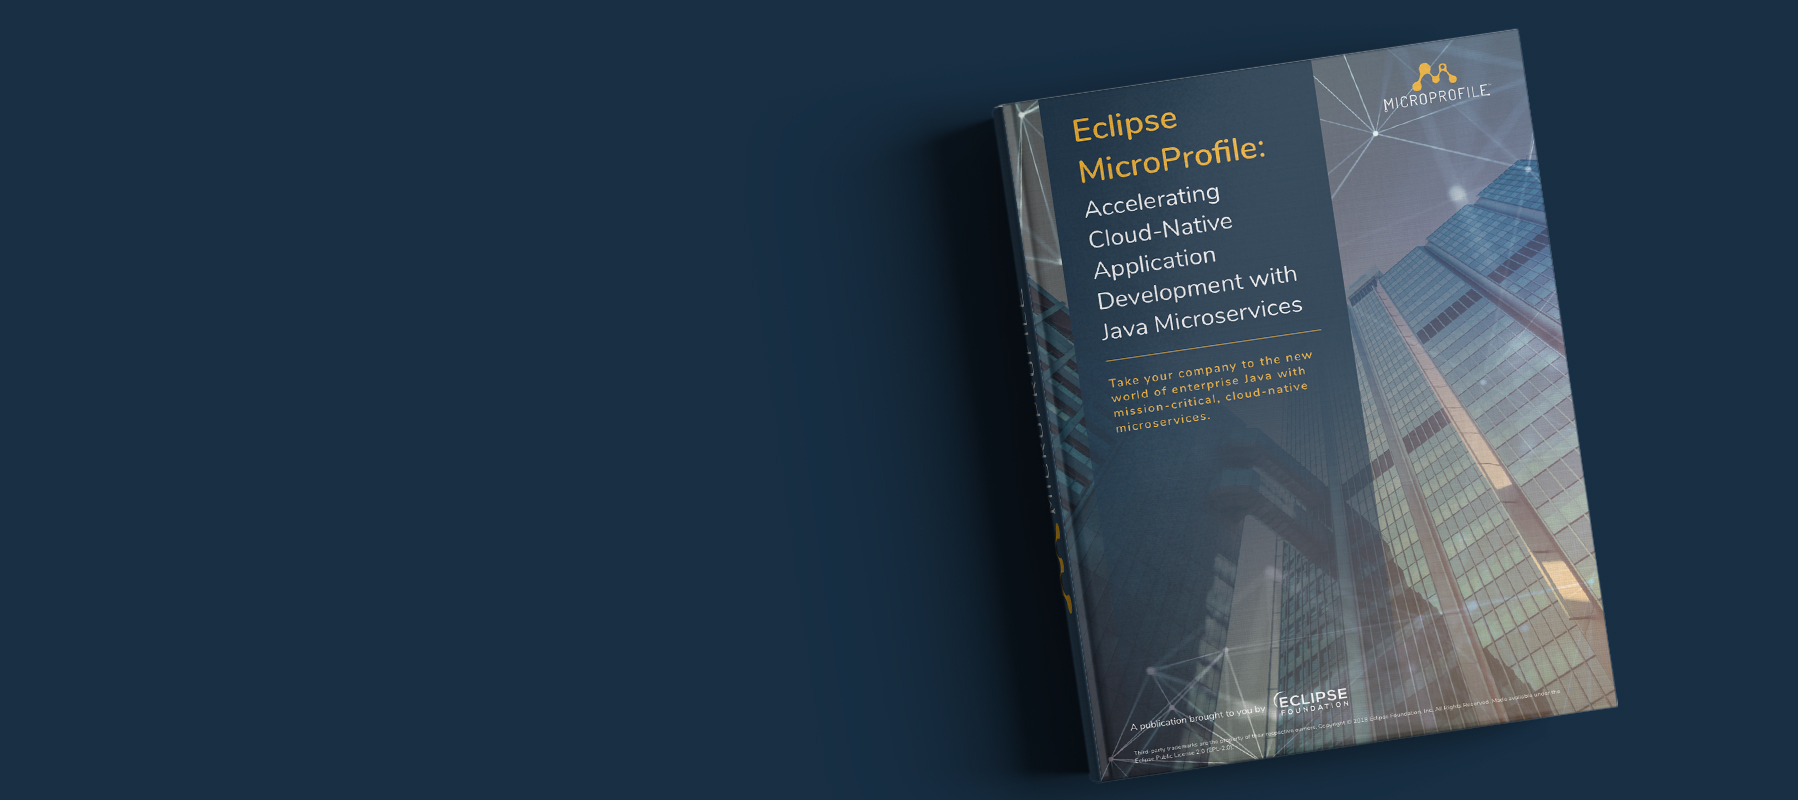 The Business Value of Eclipse MicroProfile e-book now available